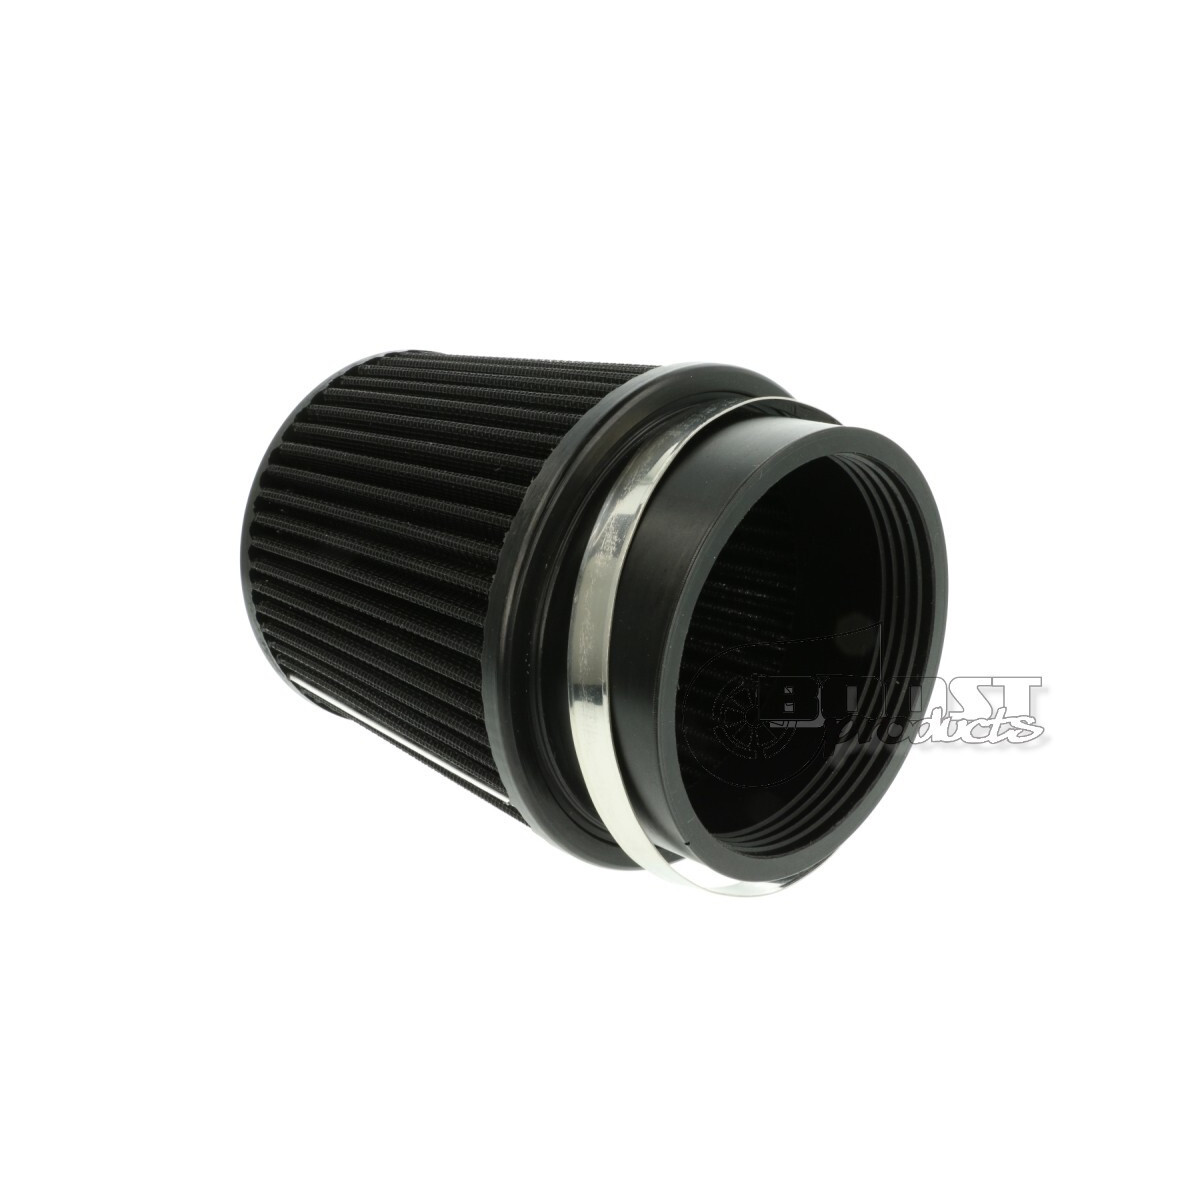 BOOST Products Universal air filter 127mm / 100mm connection, black